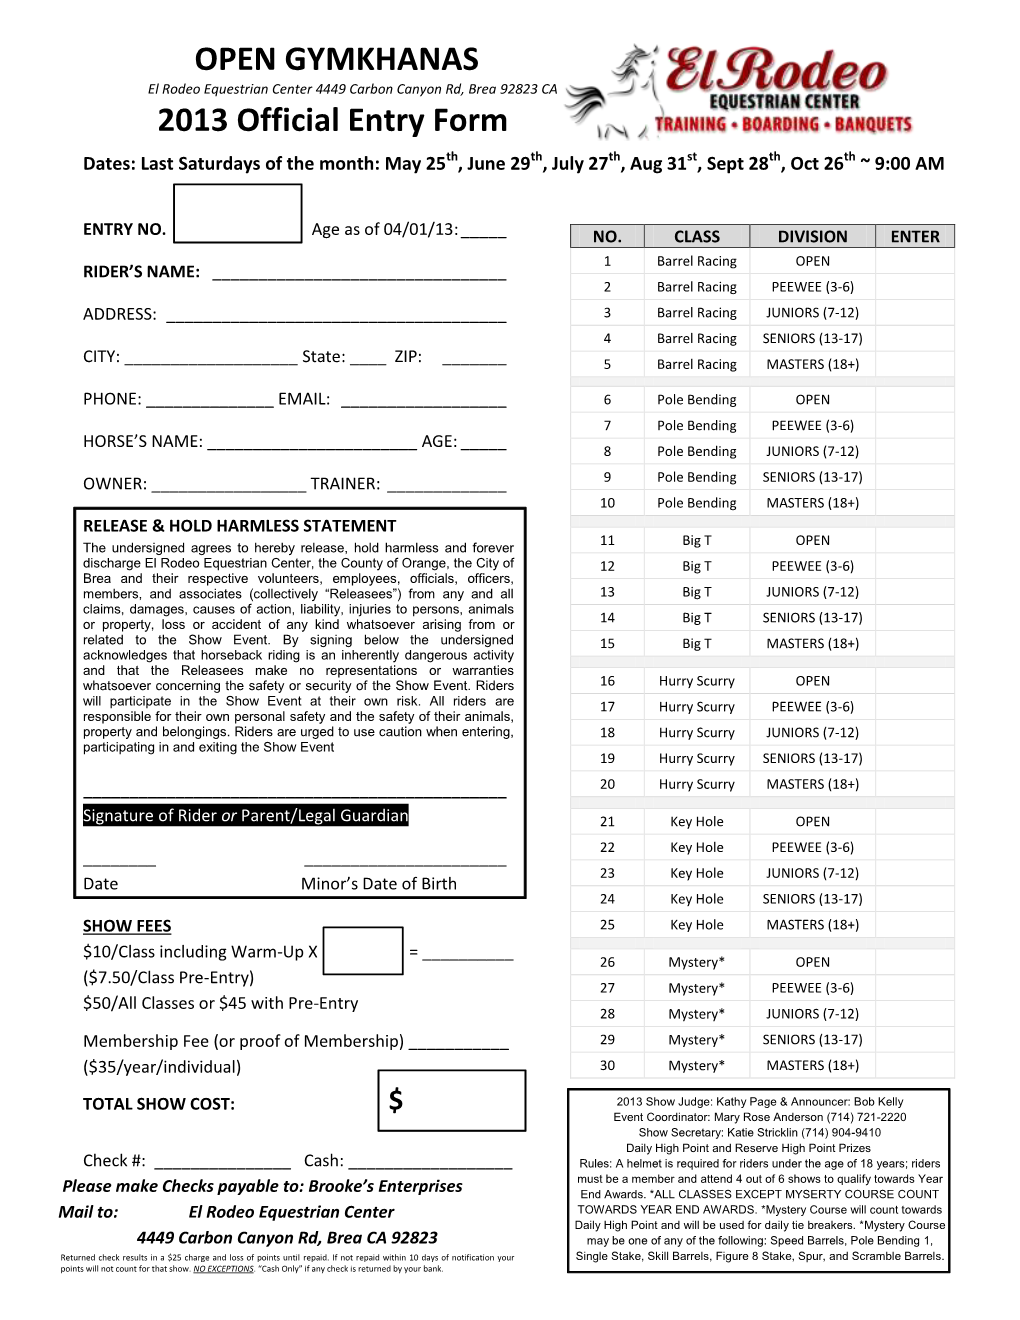 OPEN GYMKHANAS 2013 Official Entry Form